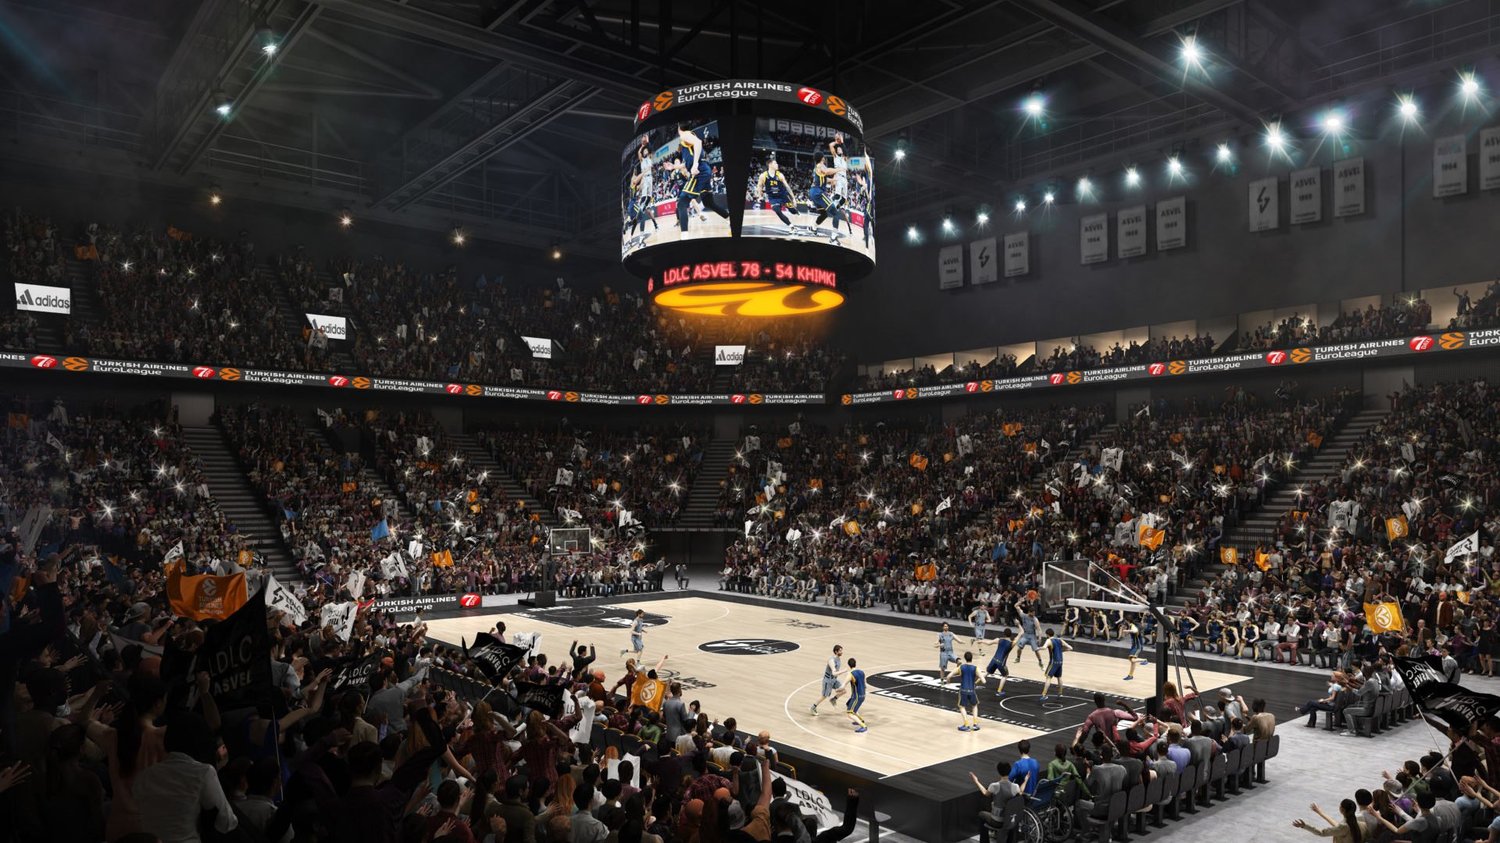 LDLC Arena | Rendering by and courtesy of Populous and Jump Studios